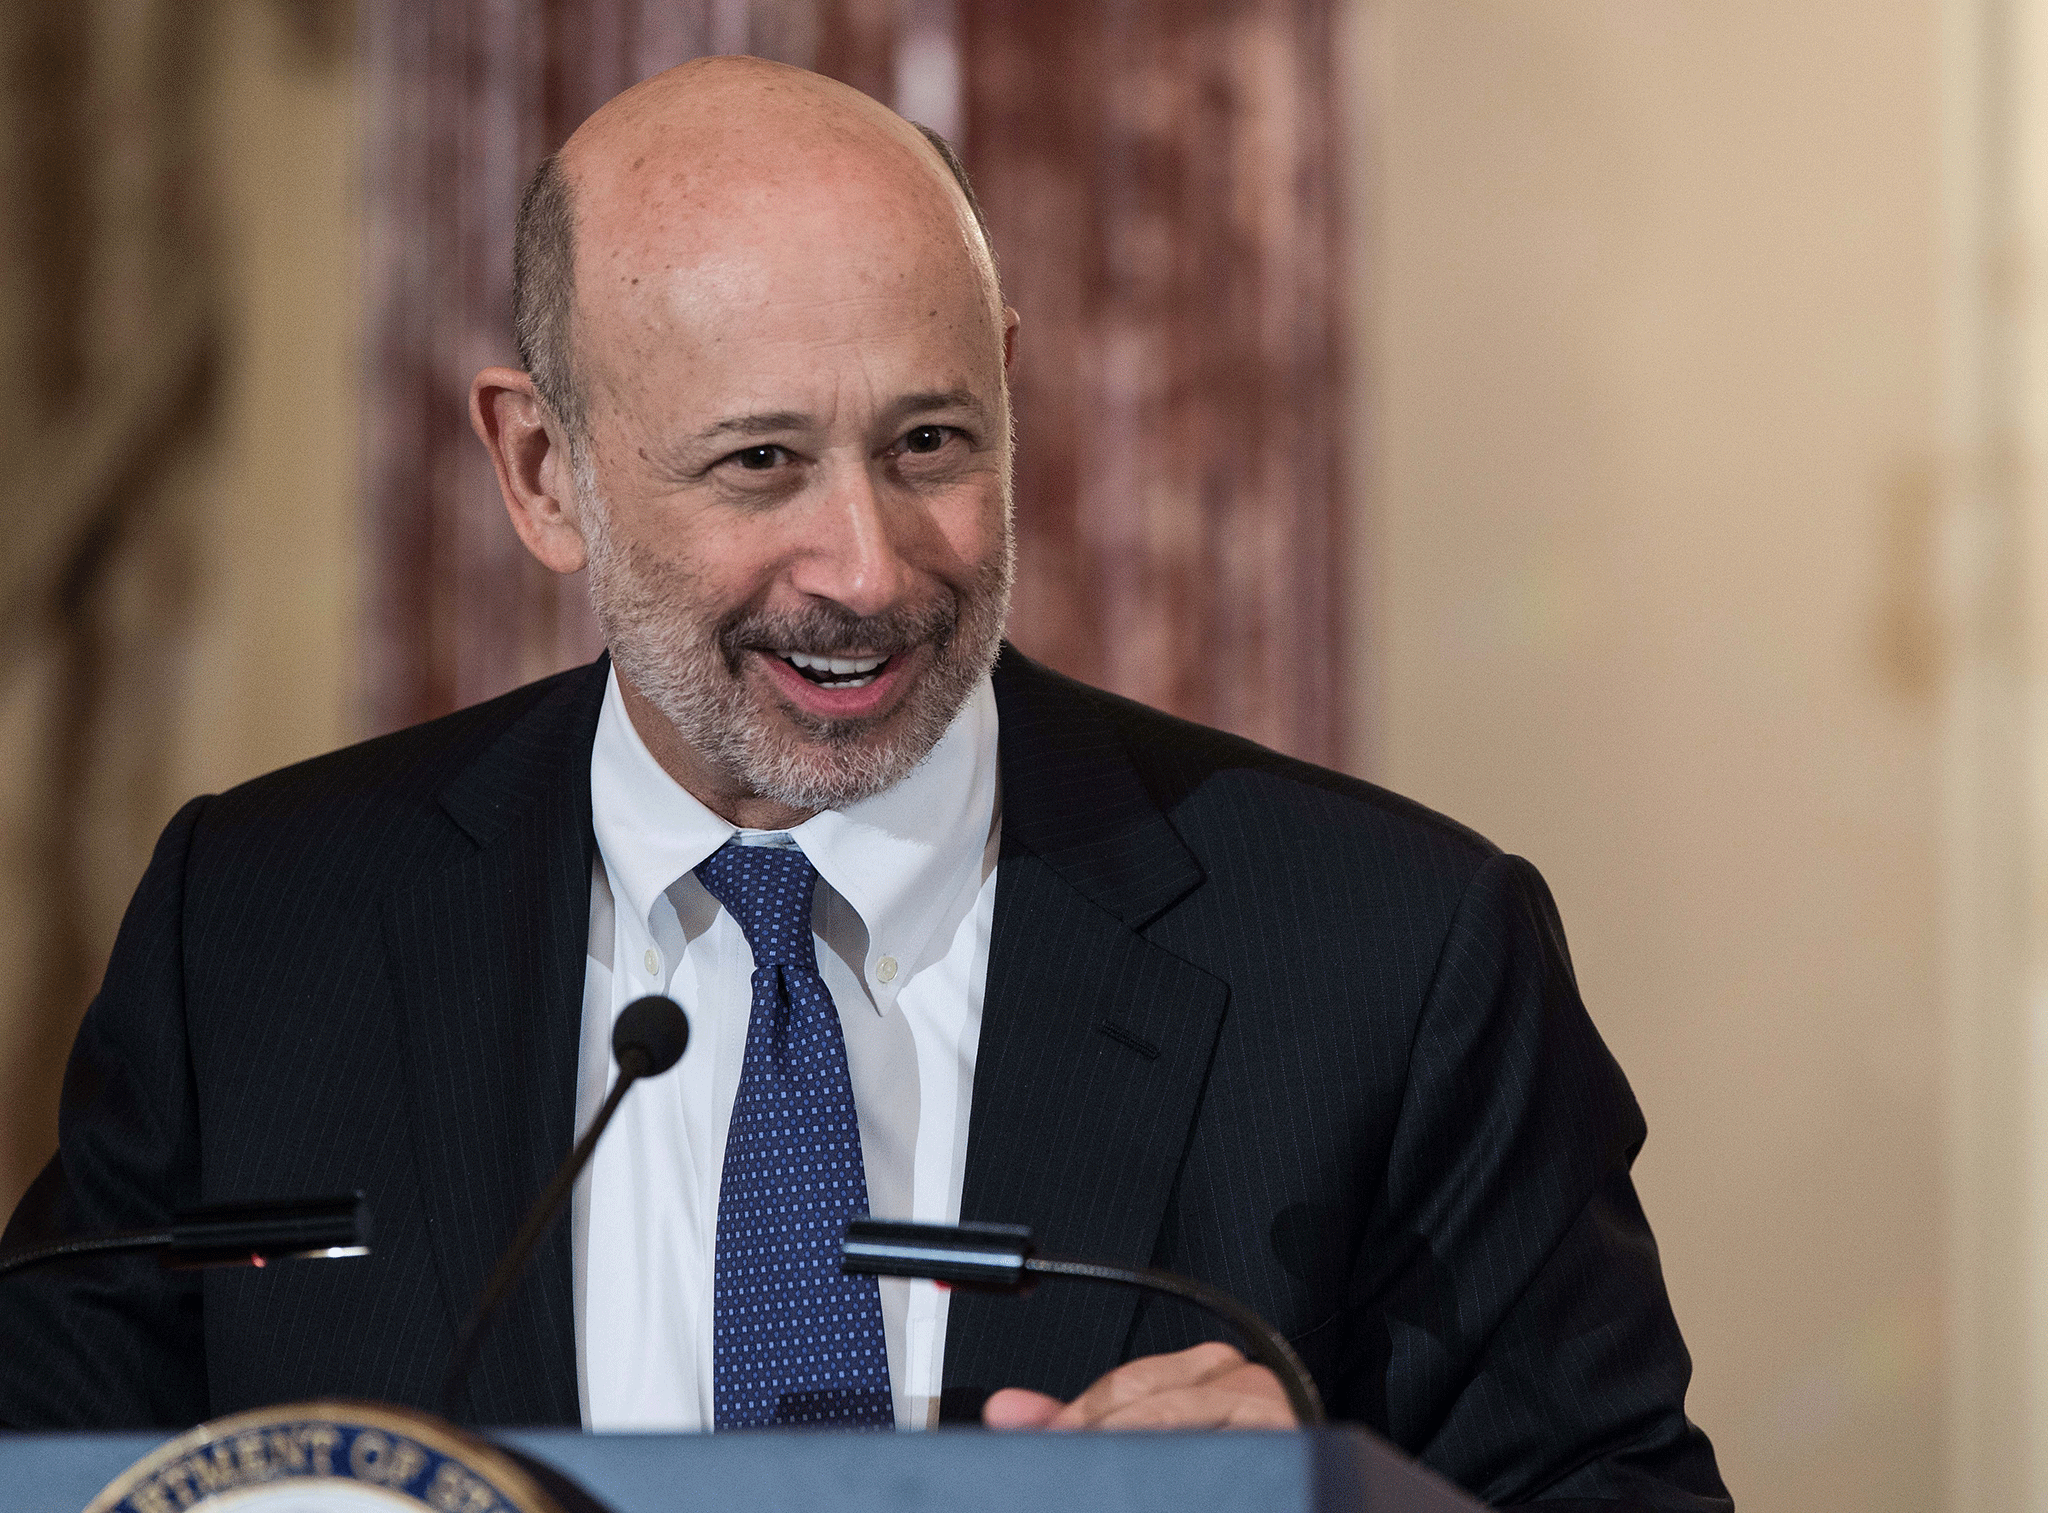 Mr Blankfein unexpectedly appeared on Twitter in early June, joining US corporate leaders in responding to Mr Trump’s decision to ditch the Paris climate accord